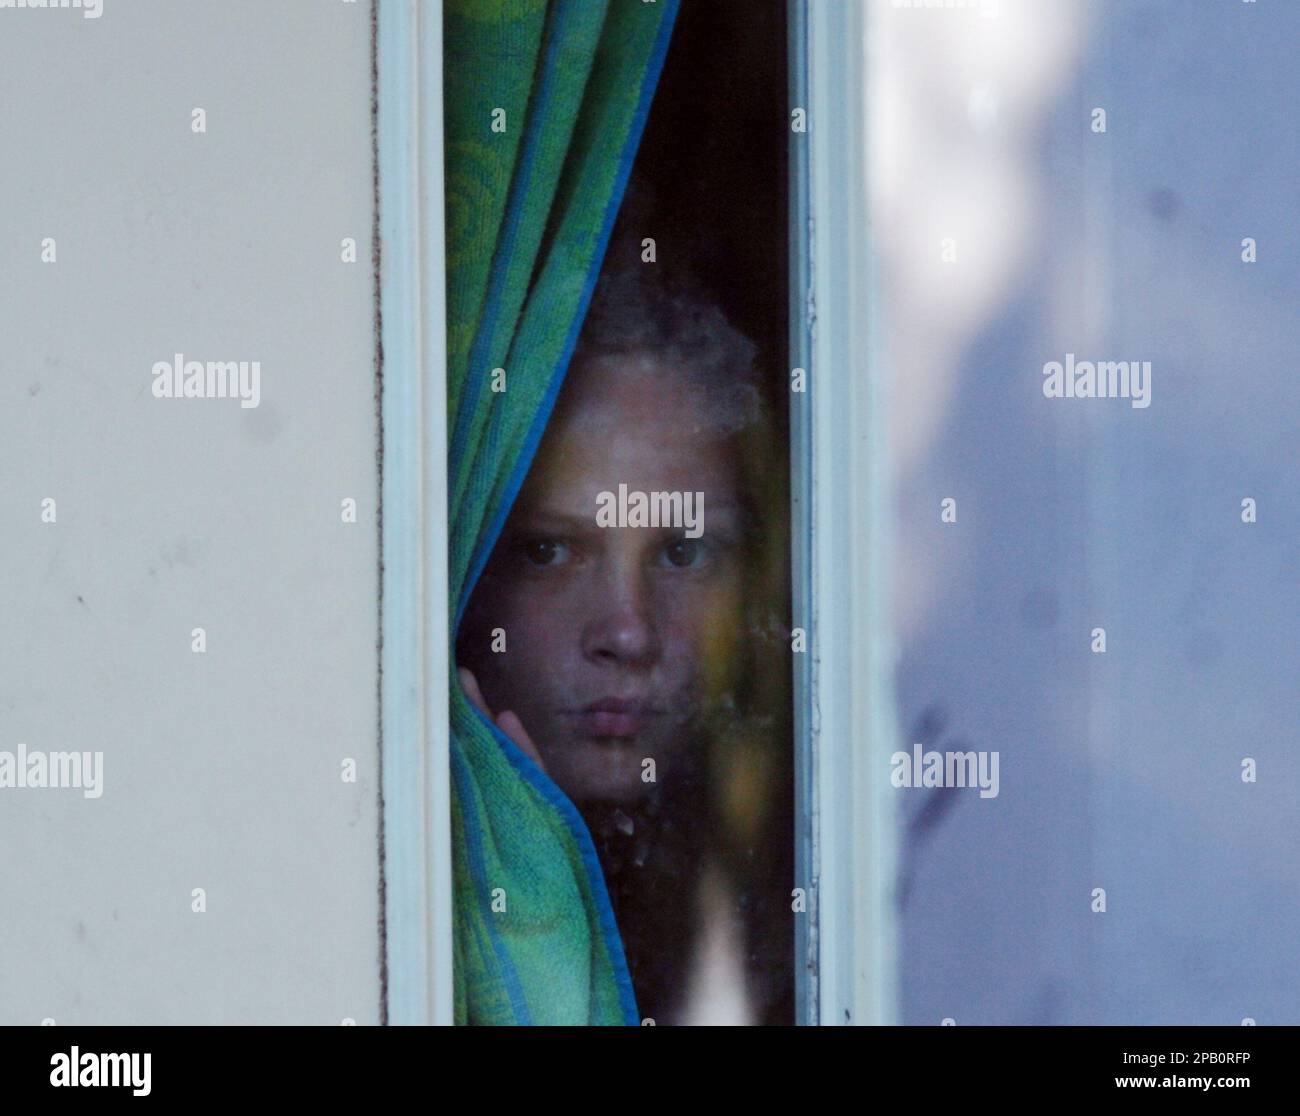 Nicole Coon, the sister of Asa Coon, peers through a window while at home Thursday, October 11, 2007 on West 43rd Street in Cleveland. Asa H. Coon, 14,opened fire Wednesday at SuccessTech Academy wounding two students and two teachers. (AP Photo/Dave Richard) Stock Photo